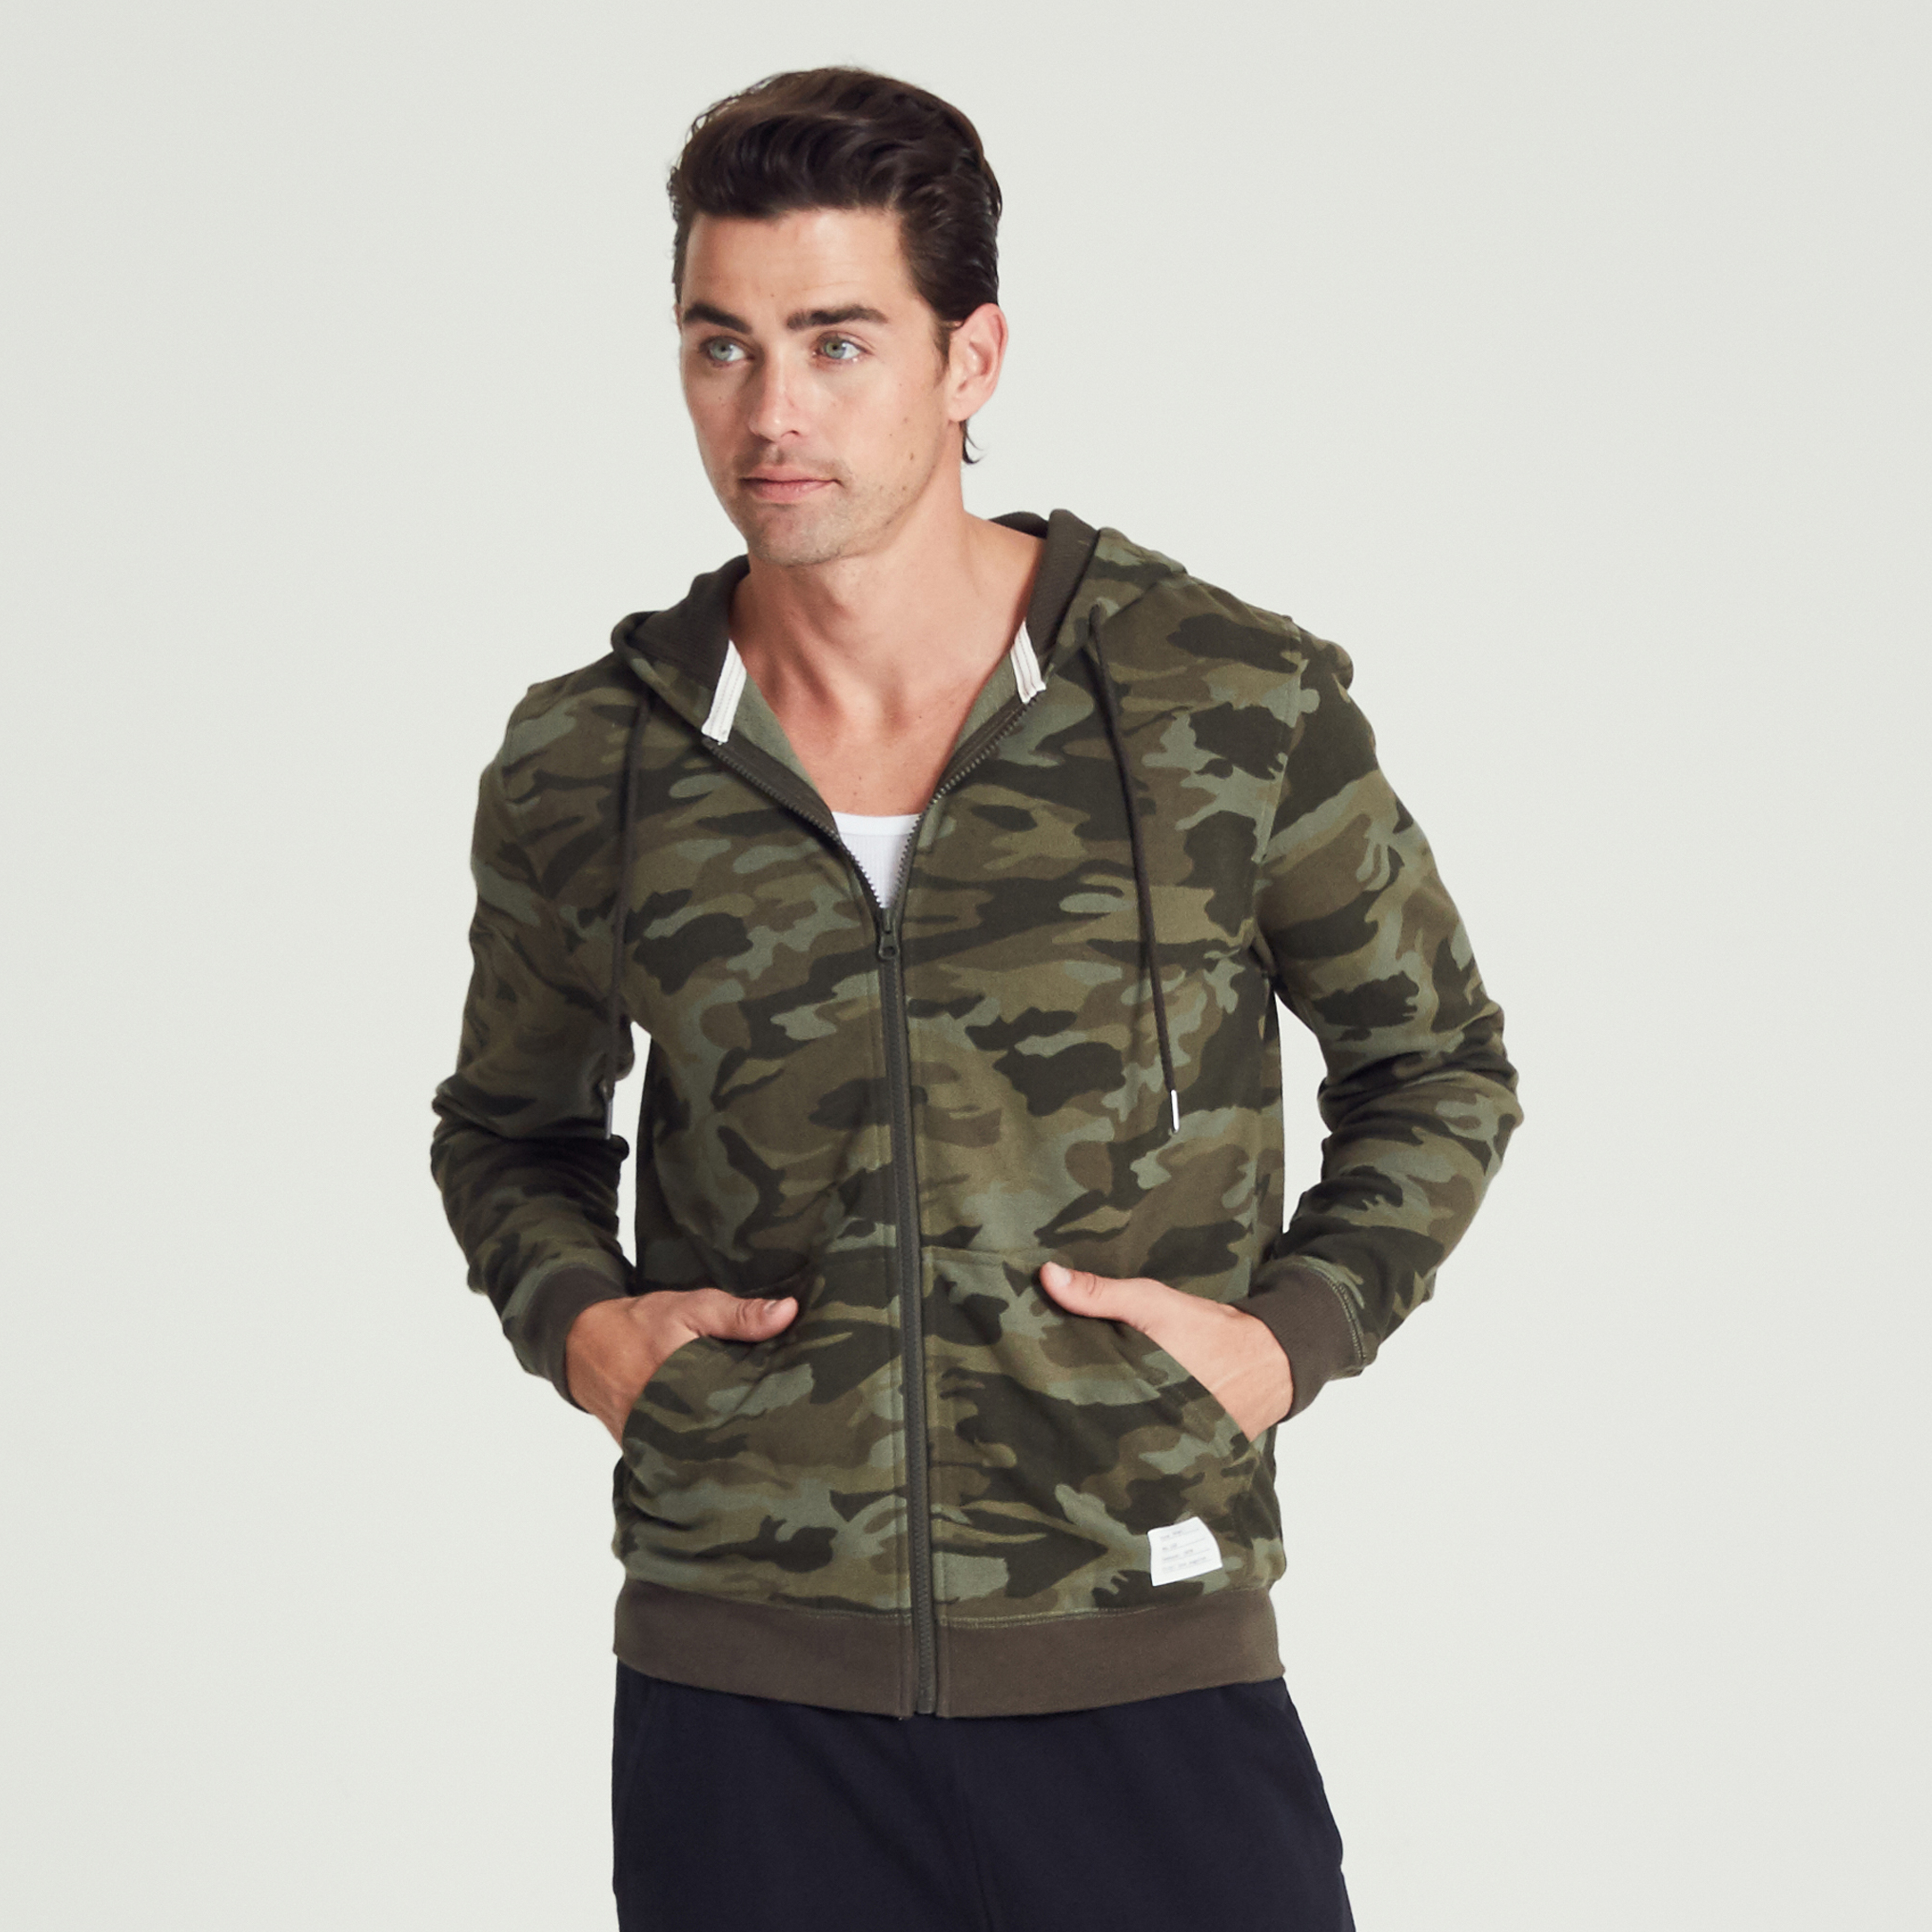 Adam Levine Men's Washed Out Zip Front Hoodie - Camo